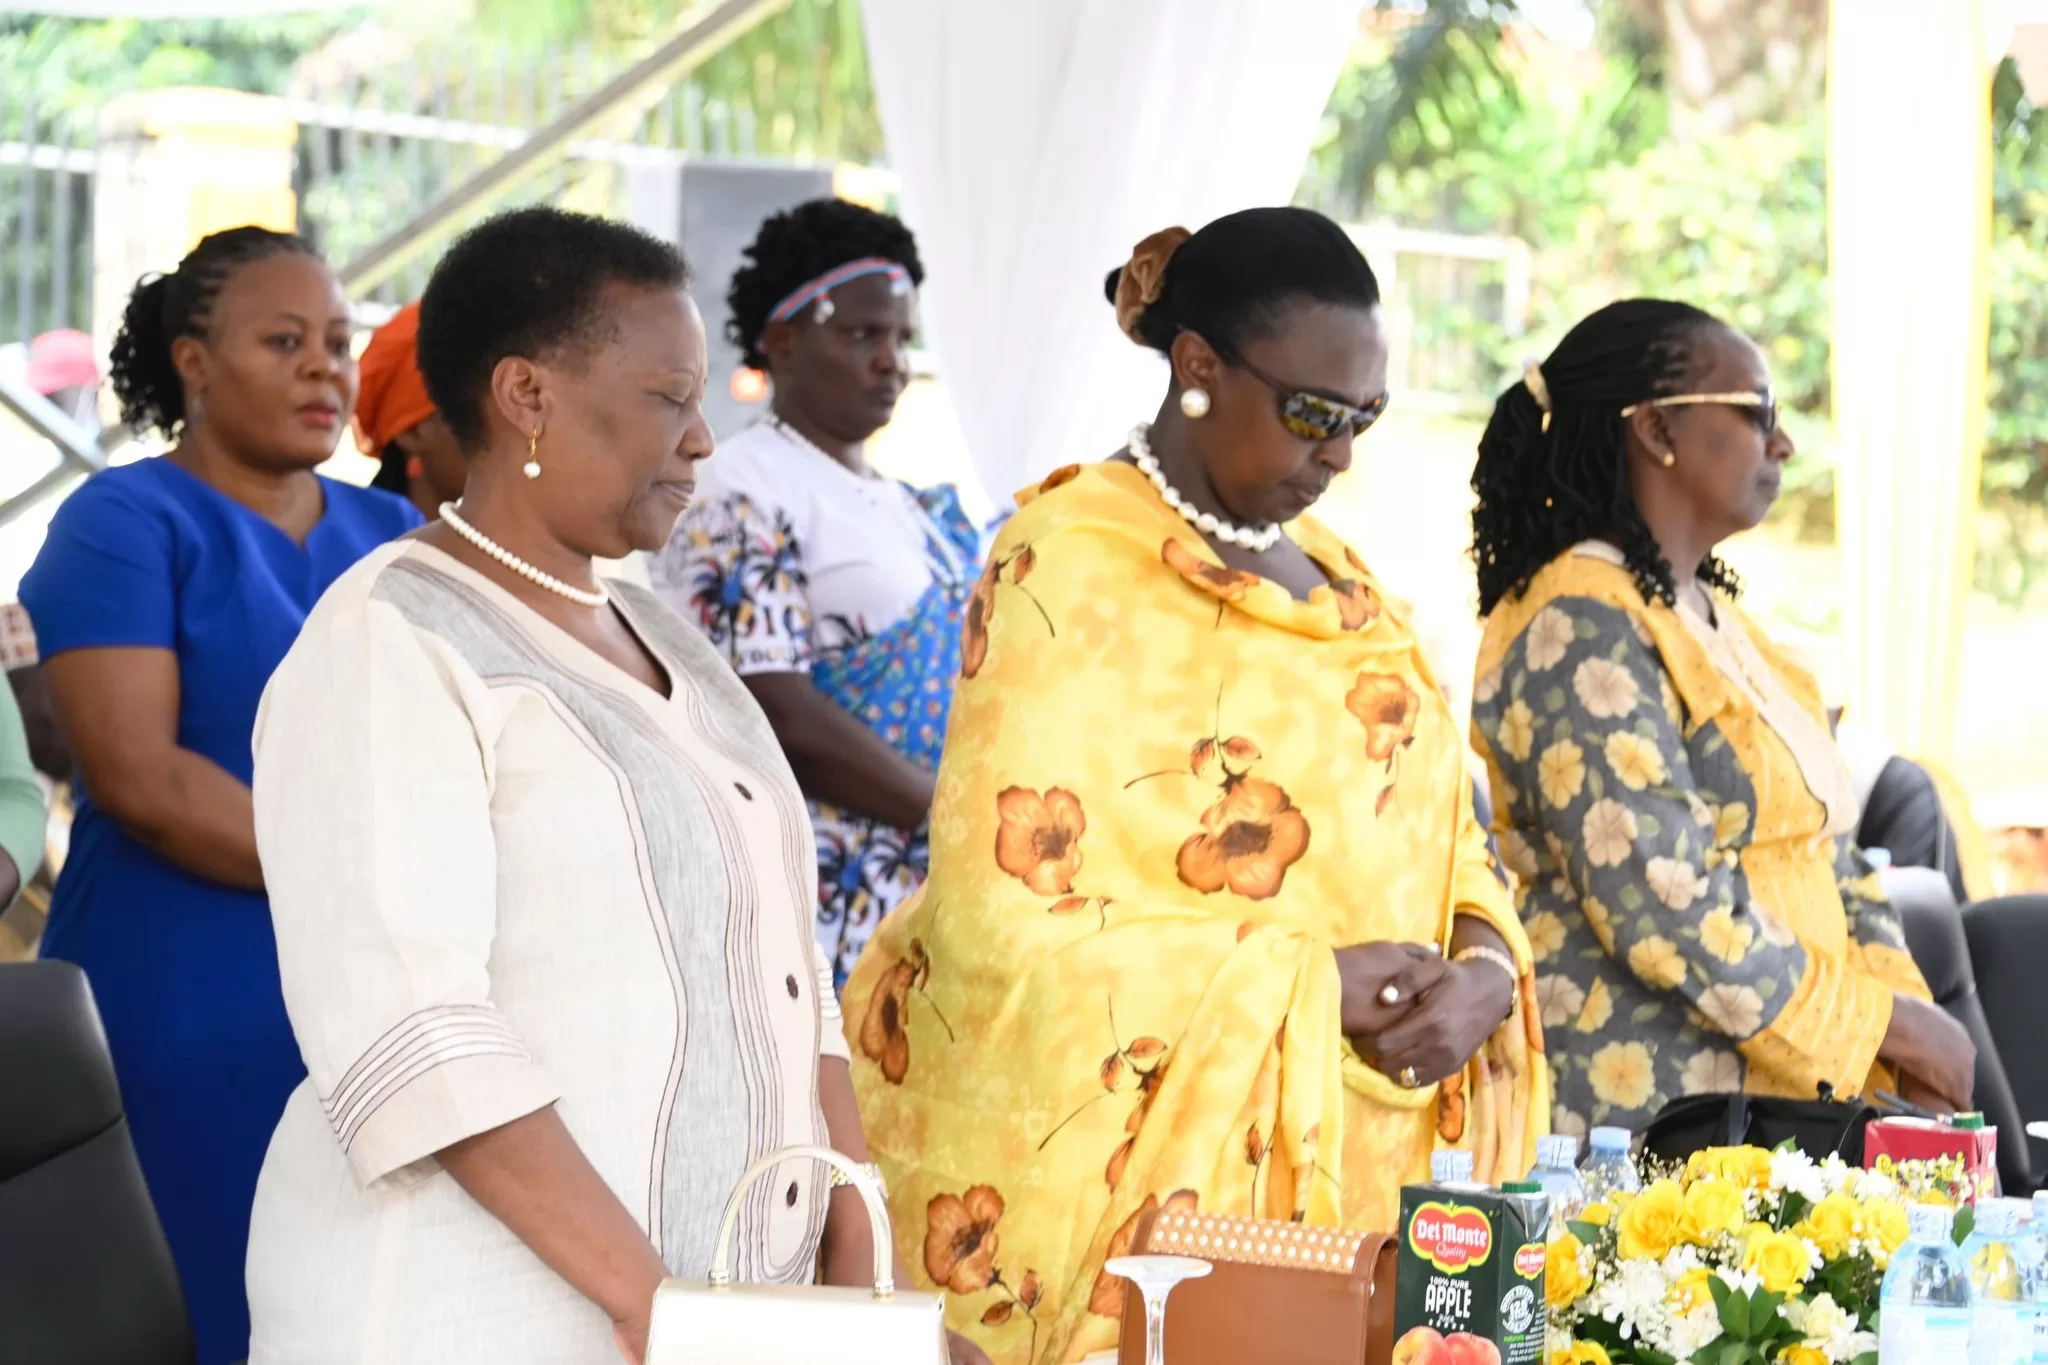 Thanksgiving Gathering in Honor of First Lady Maama @JanetMuseveni"